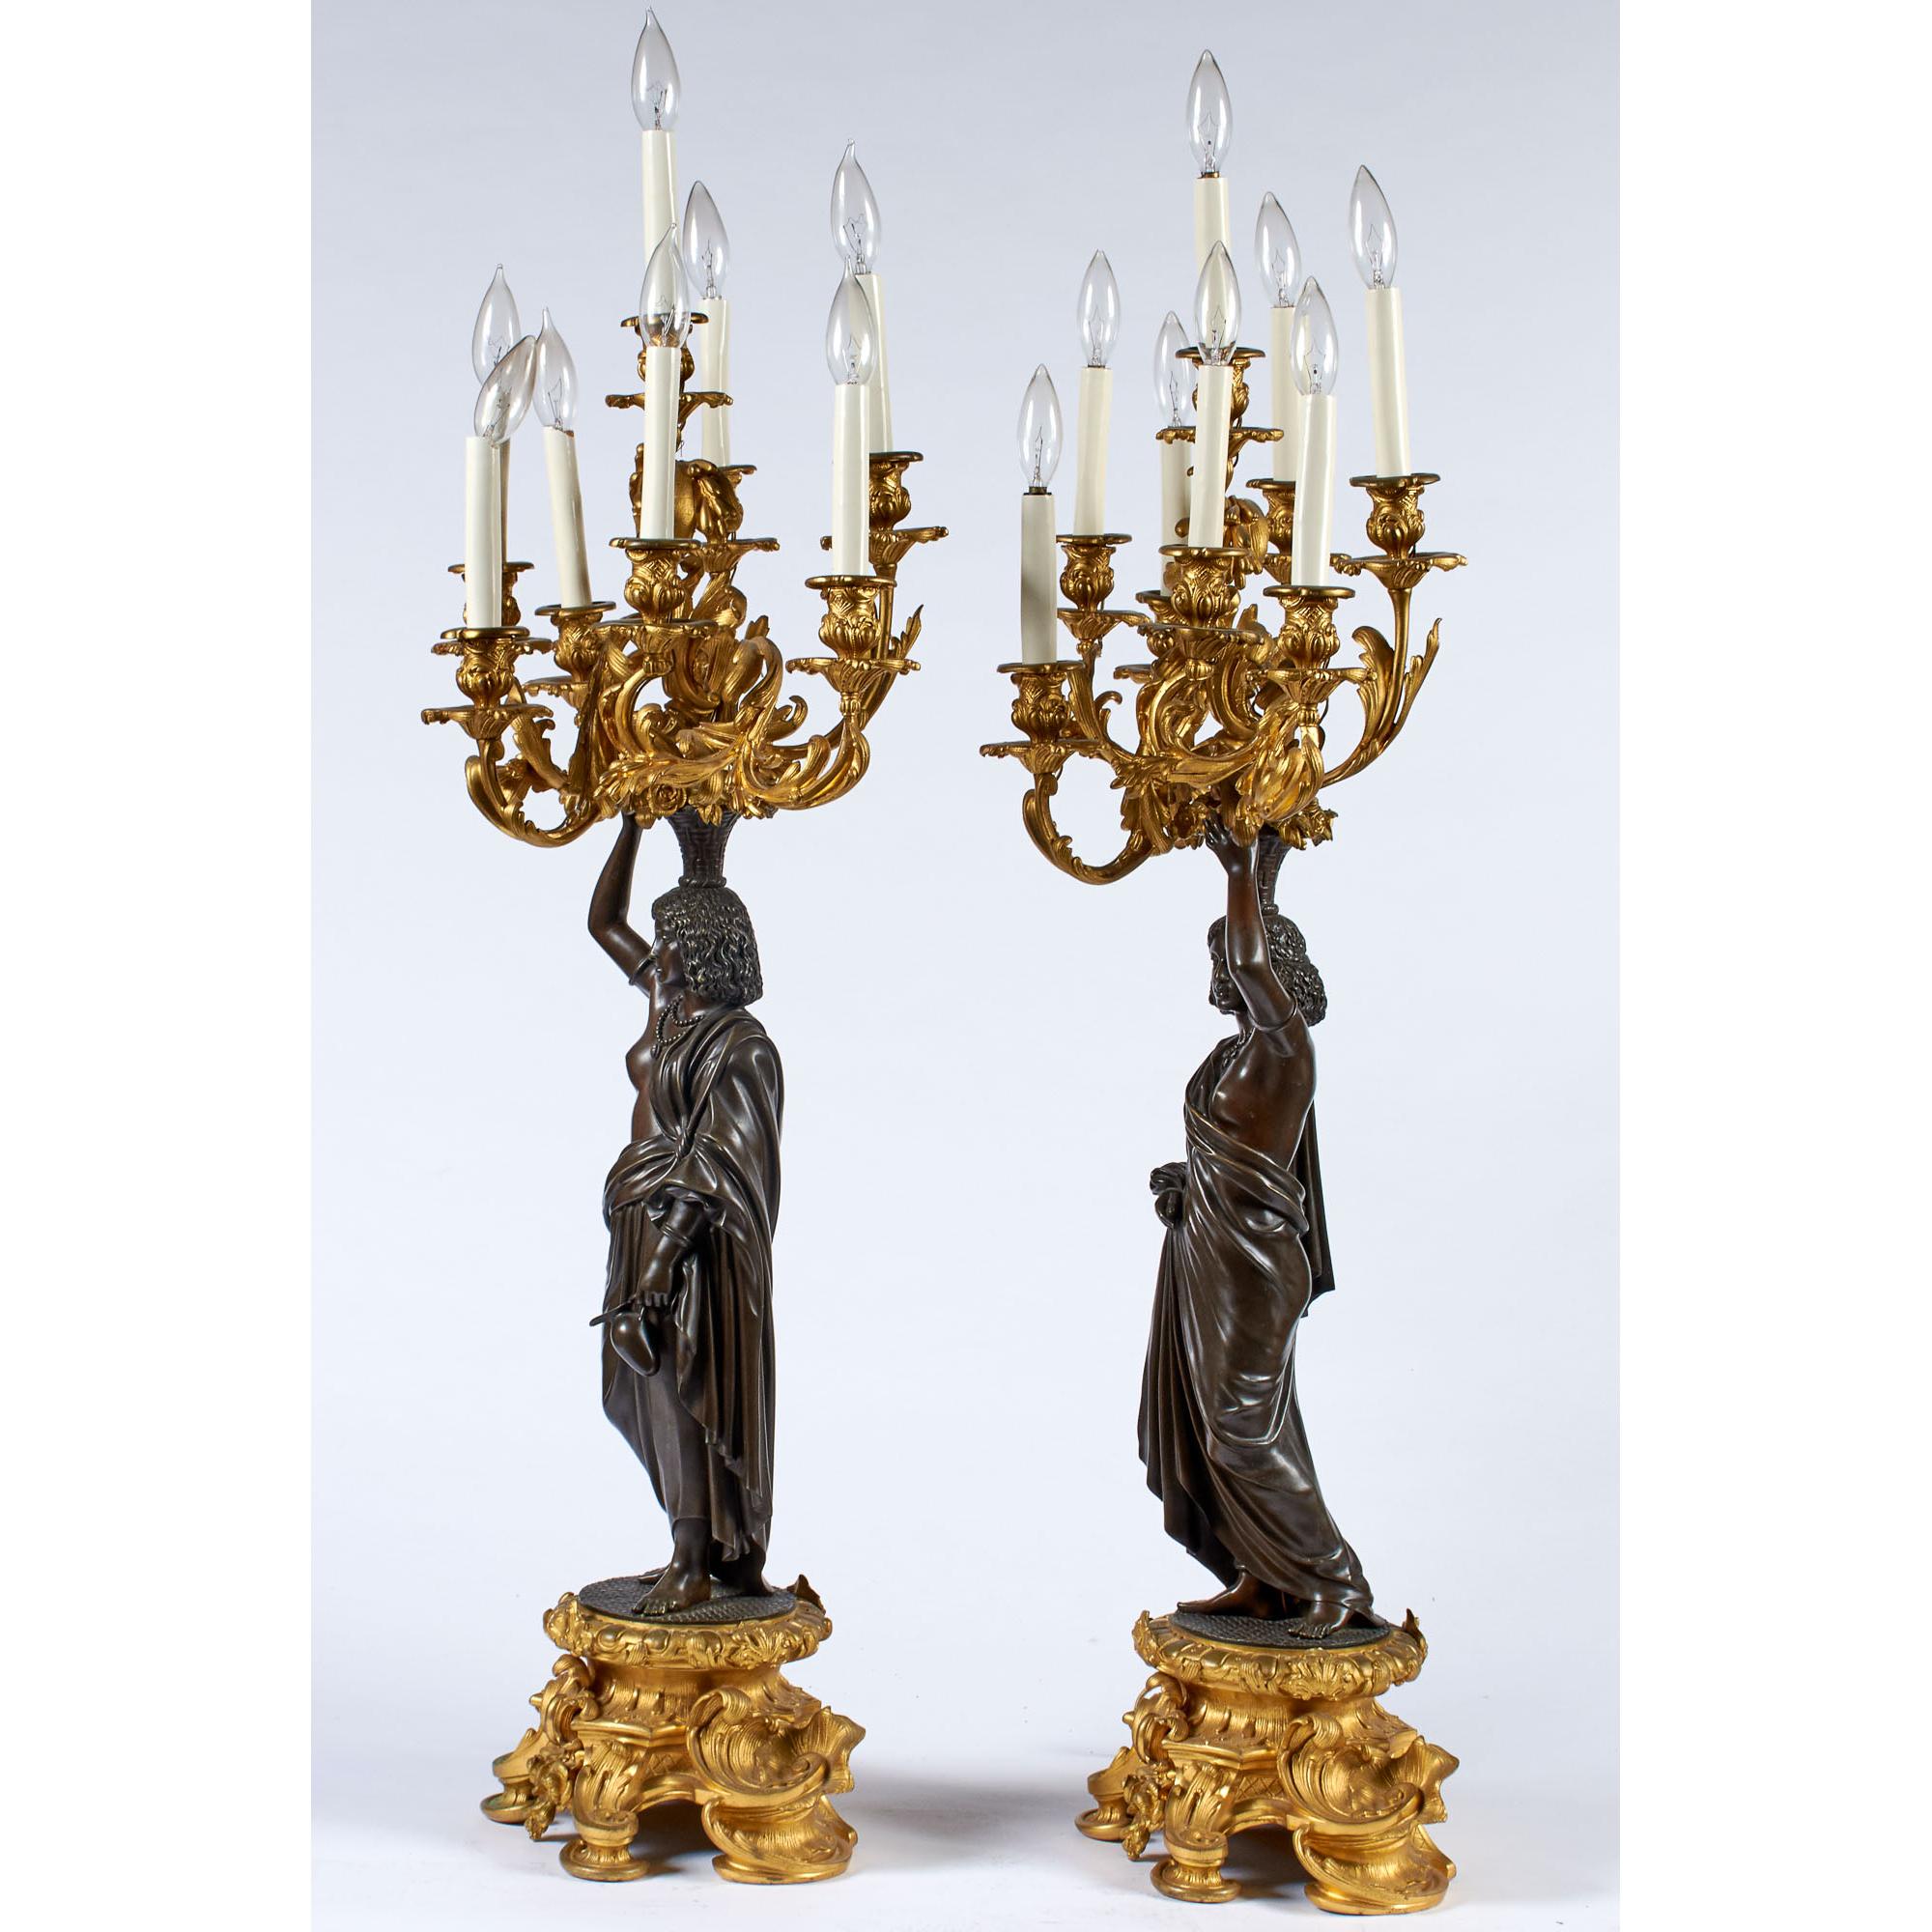 Fine Quality Pair of Ormolu and Patinated Bronze Figural Eight-Light Candelabras

Origin: French
Date: Circa 1900
Dimension: 37 1/2 inches tall